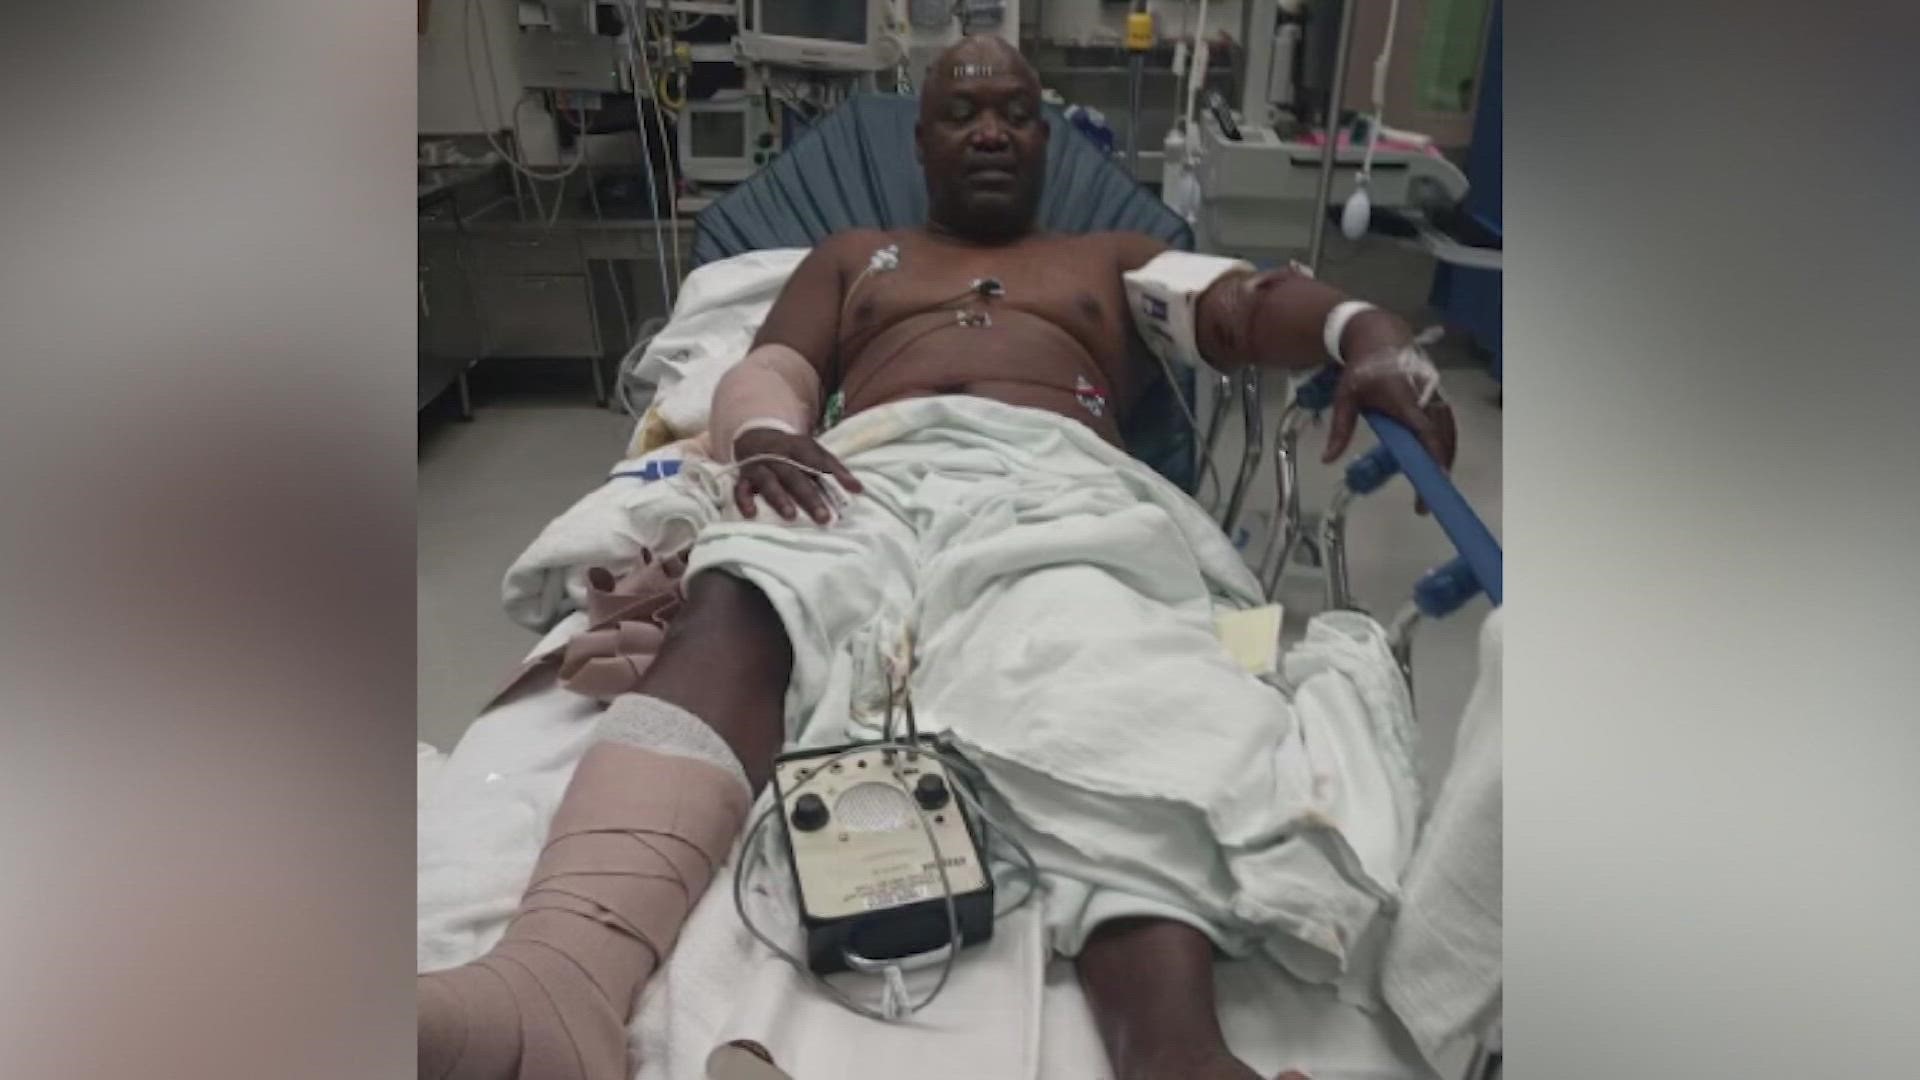 A Dallas man is healing after his vacation to Galveston ended when he was attacked by two dogs. The incident happened outside his home on the island.